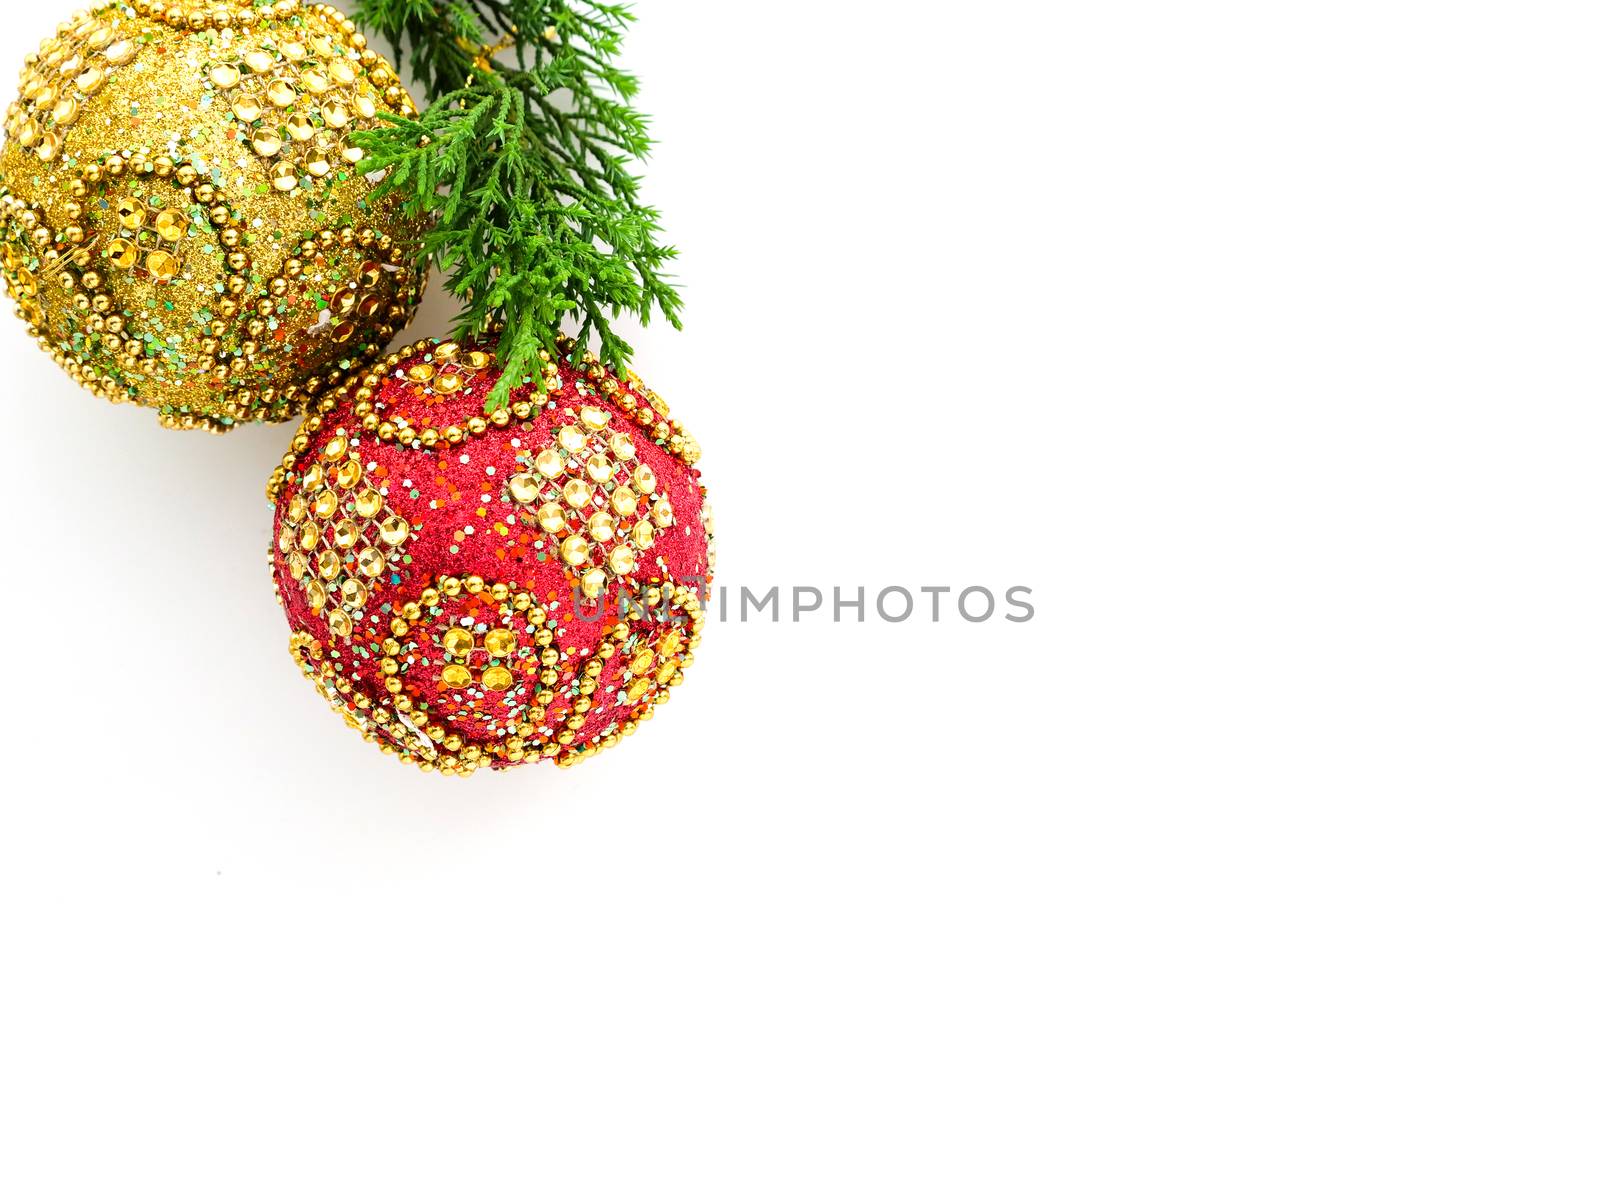 red and gold Christmas balls with glittering golden beads and glasses, isolated on white background